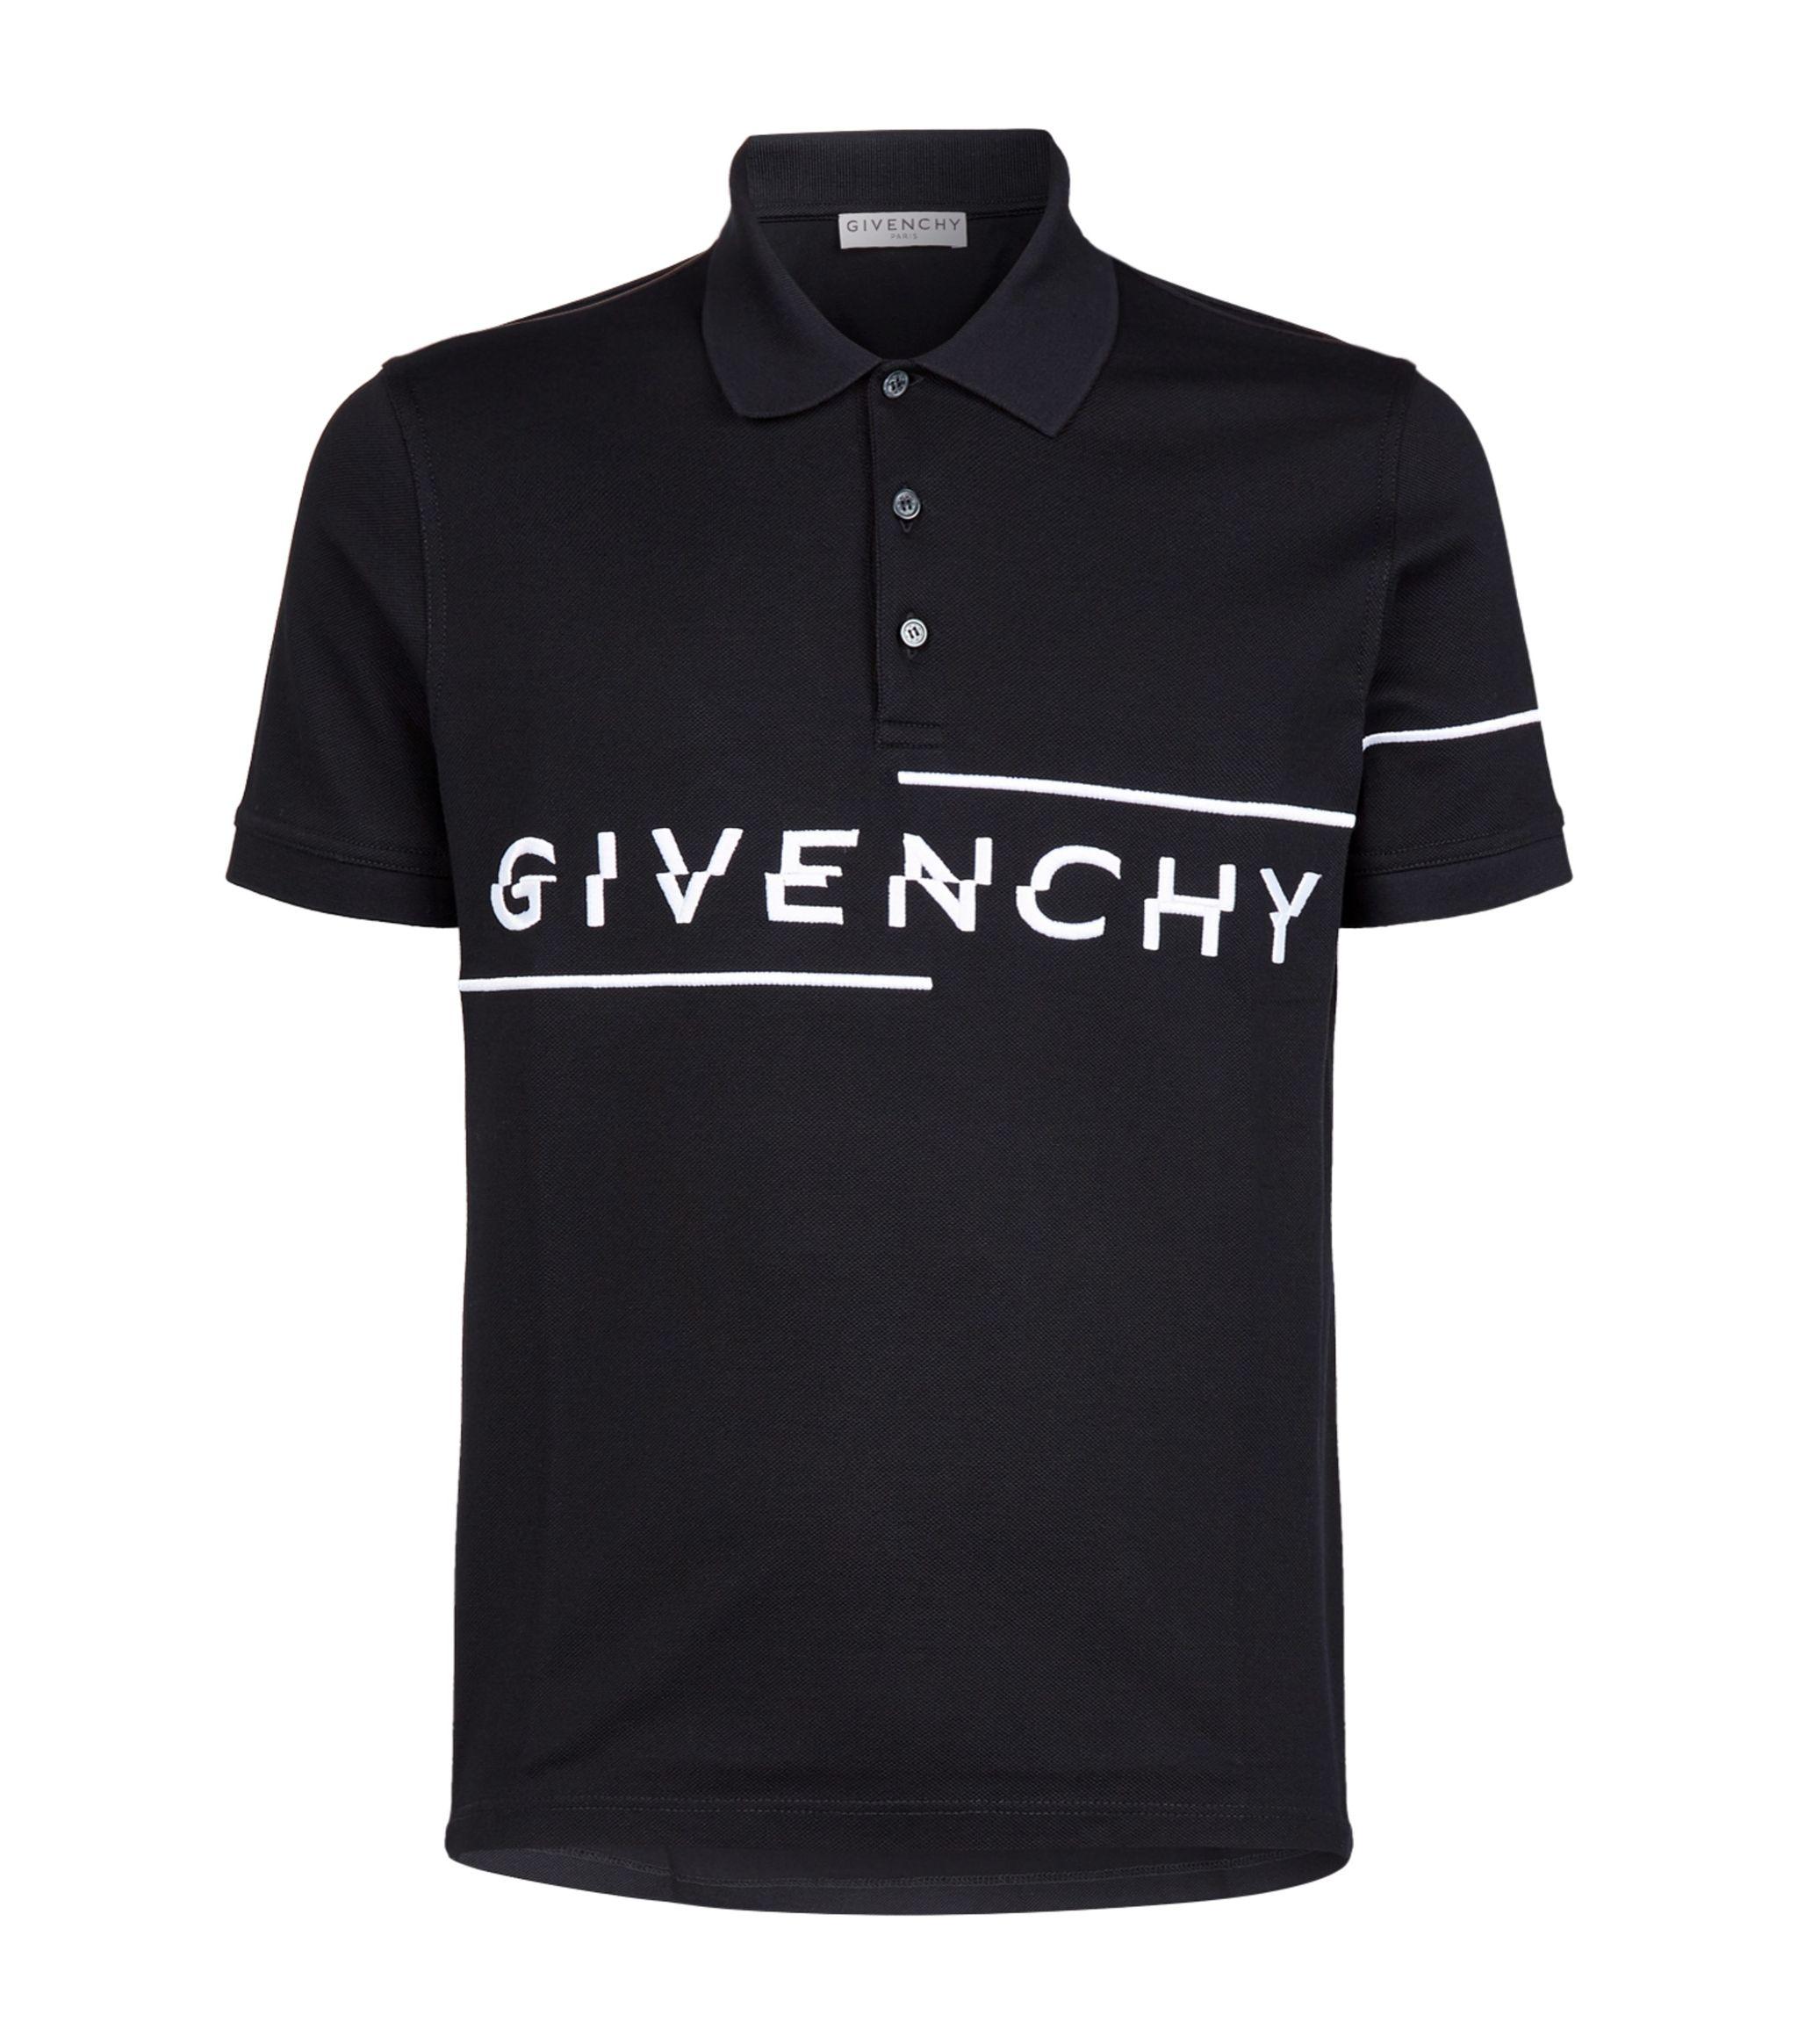 Givenchy Split Logo Polo Shirt in Black for Men - Save 23% - Lyst